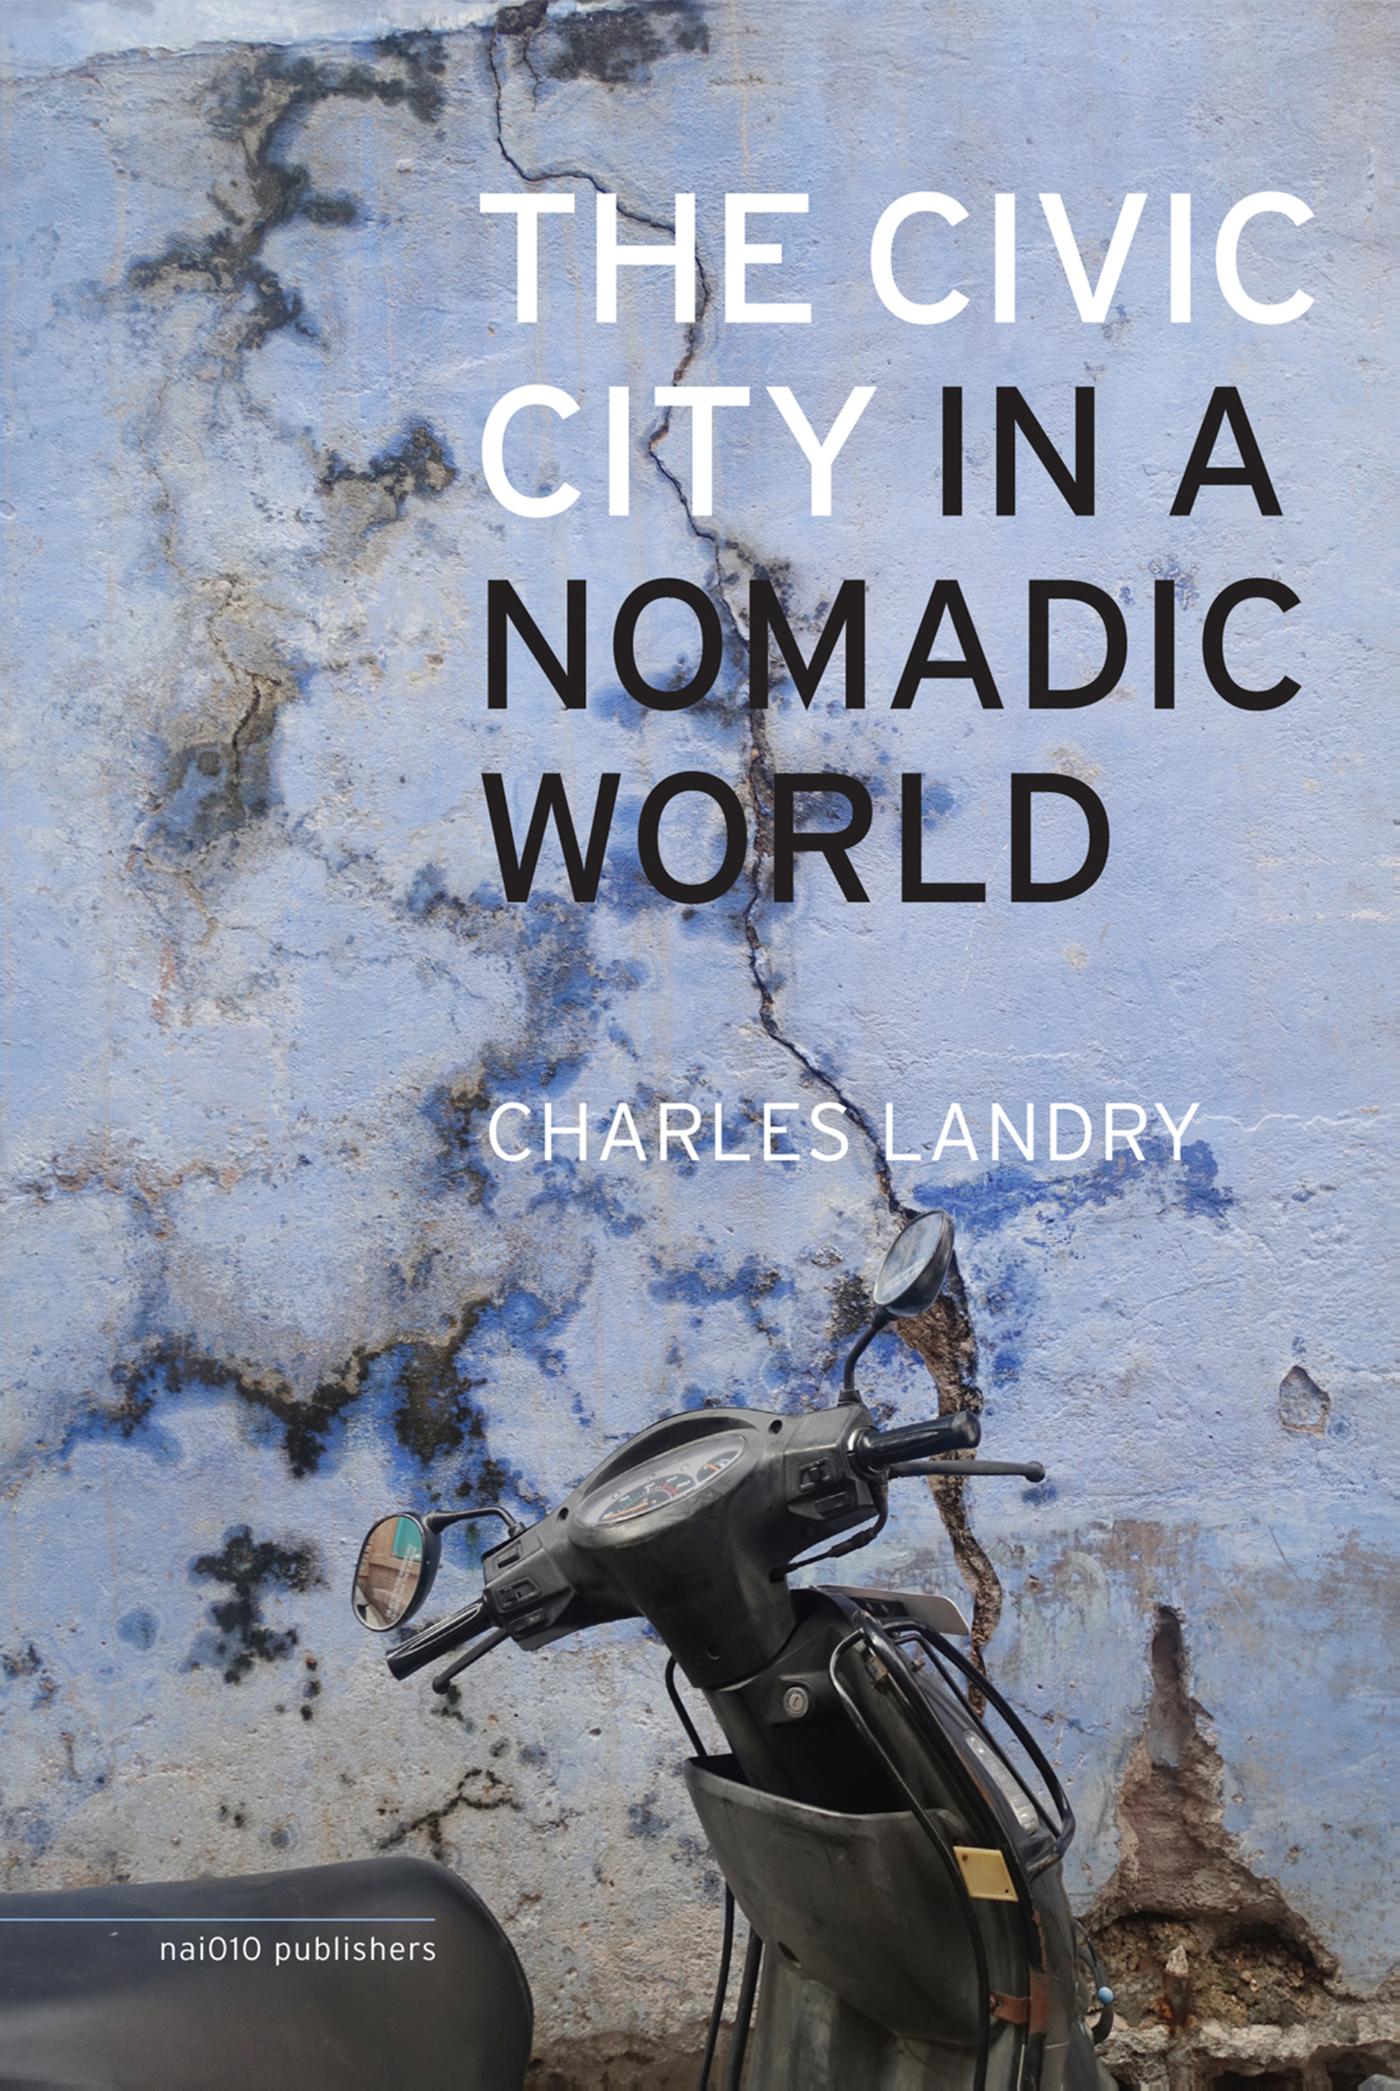 The civic city in a nomadic world (Ebook)